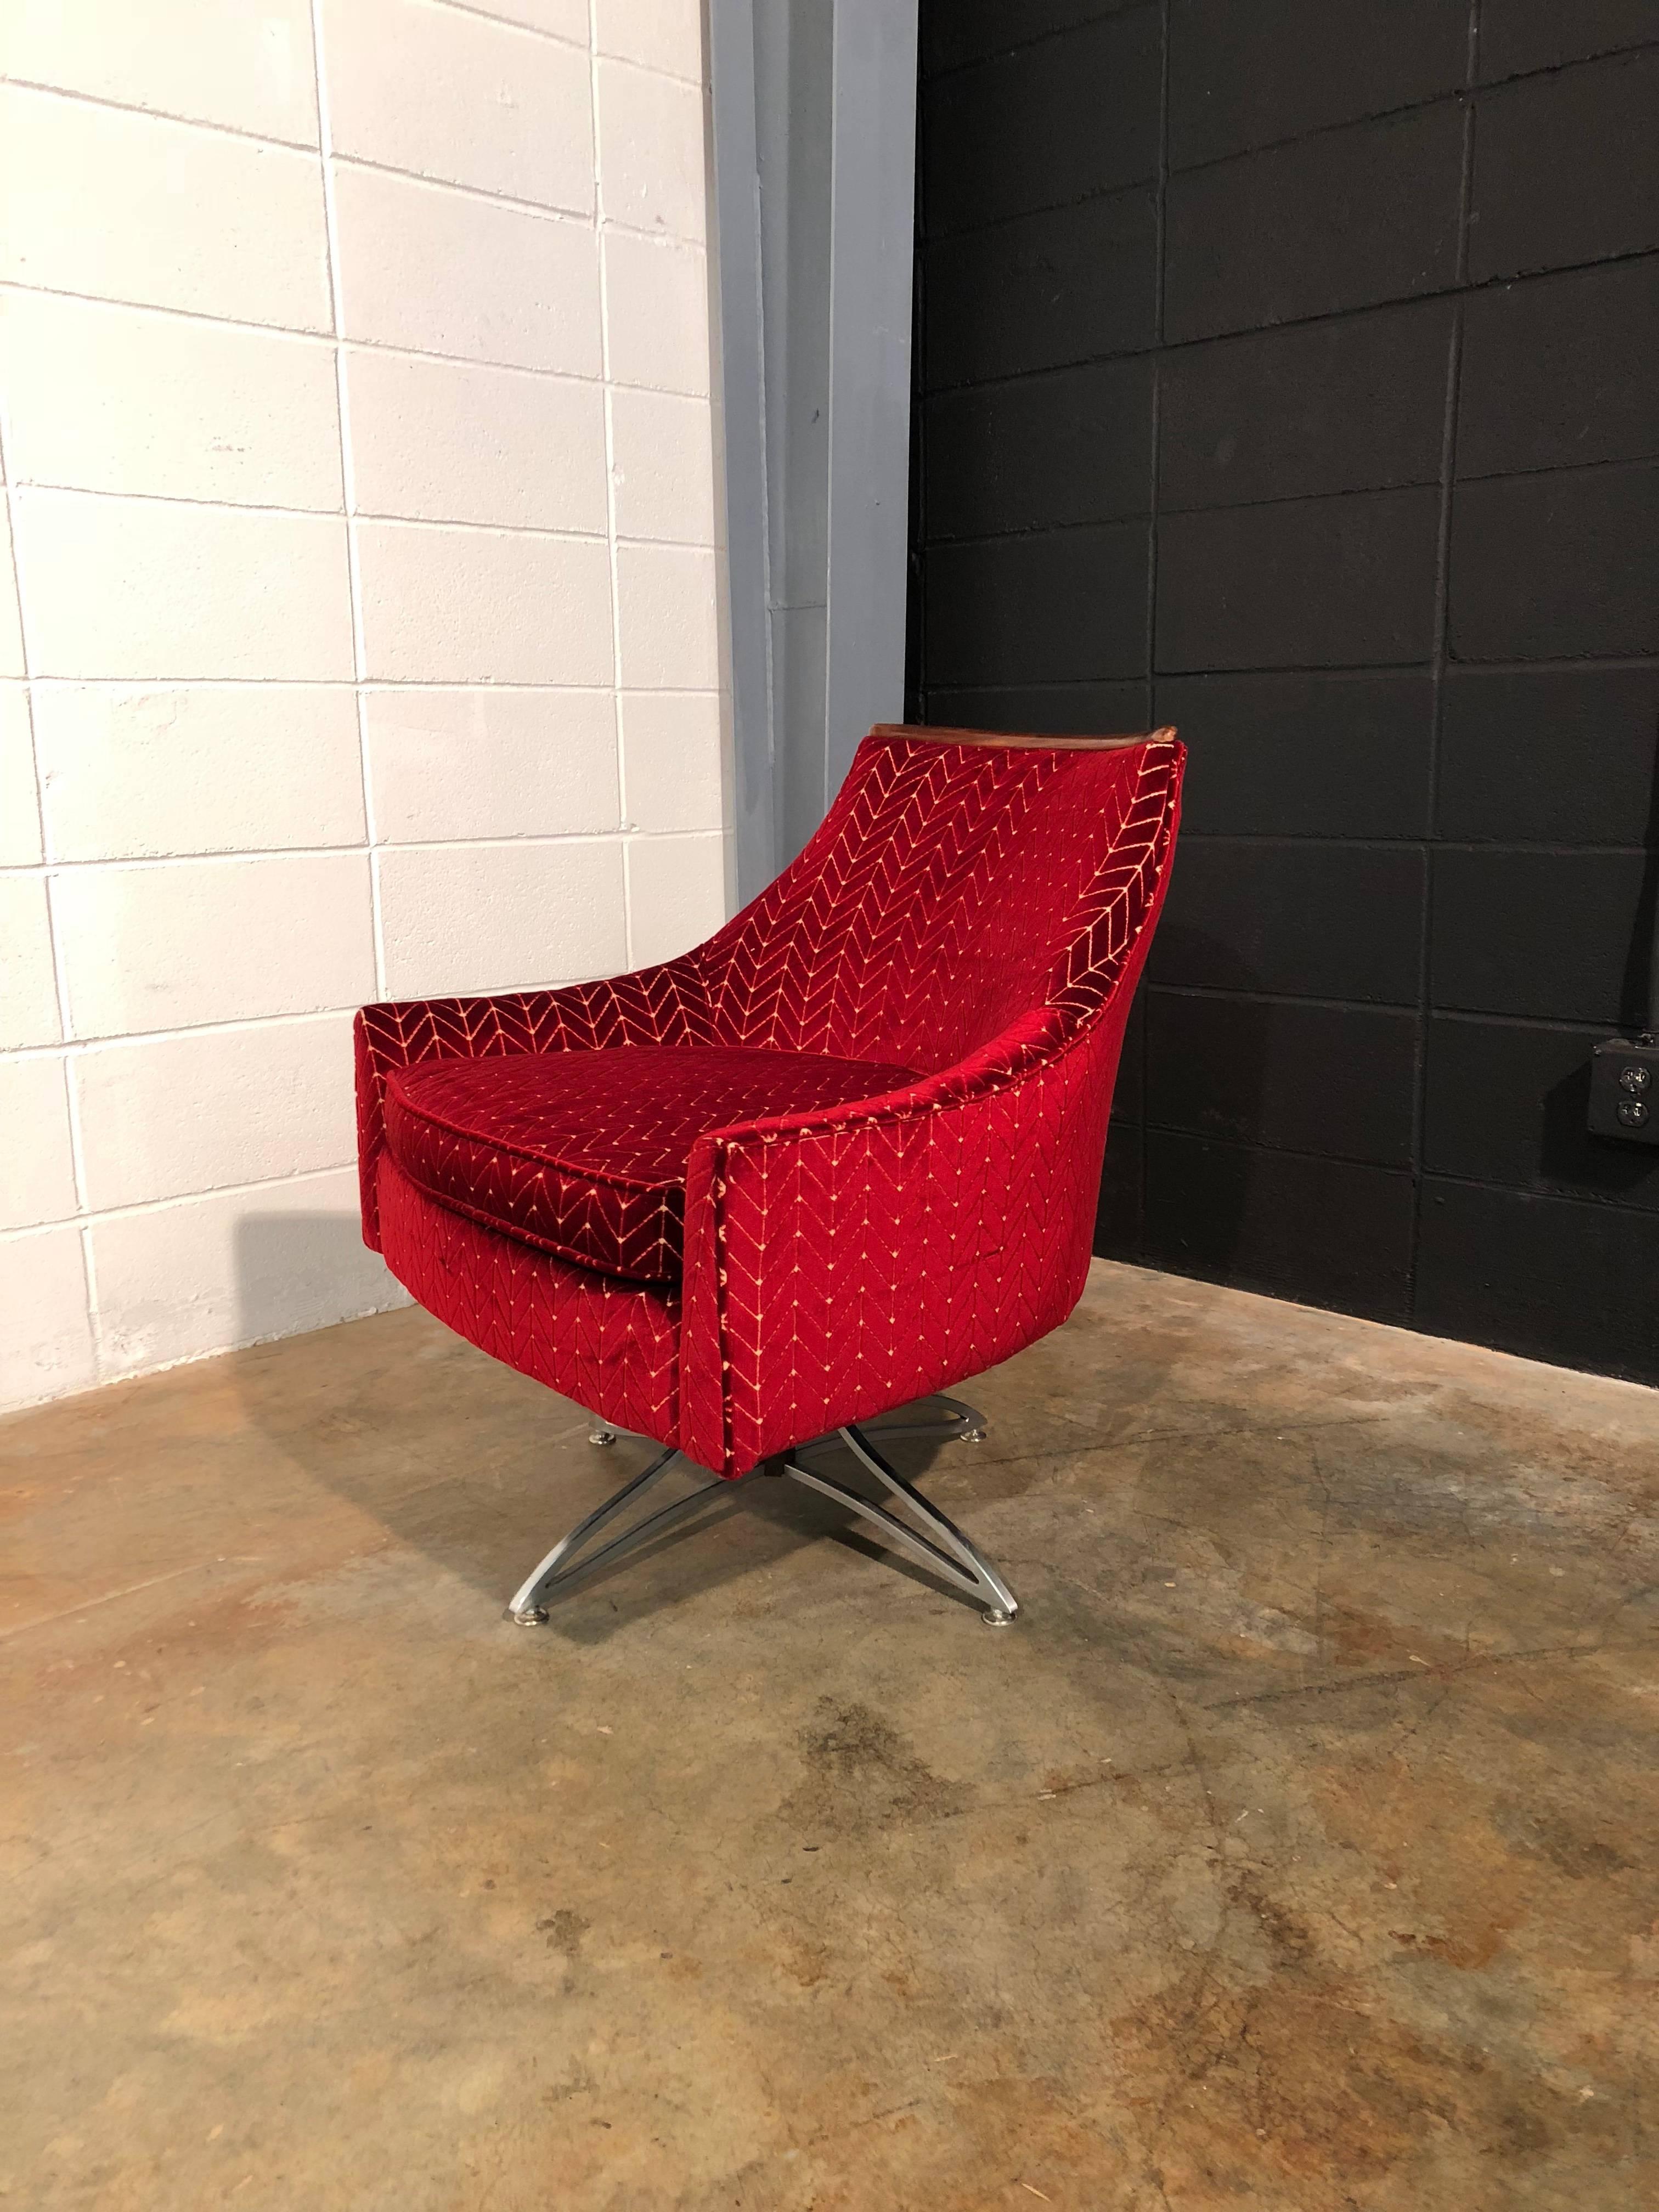 Unique Mid-Century Modern swivel chair.
Very cool shape on this one. Check out the pointed back

This chair has been completely restored including new foam, new textured red velvet upholstery, polished base, and refinished walnut trim. The swivel